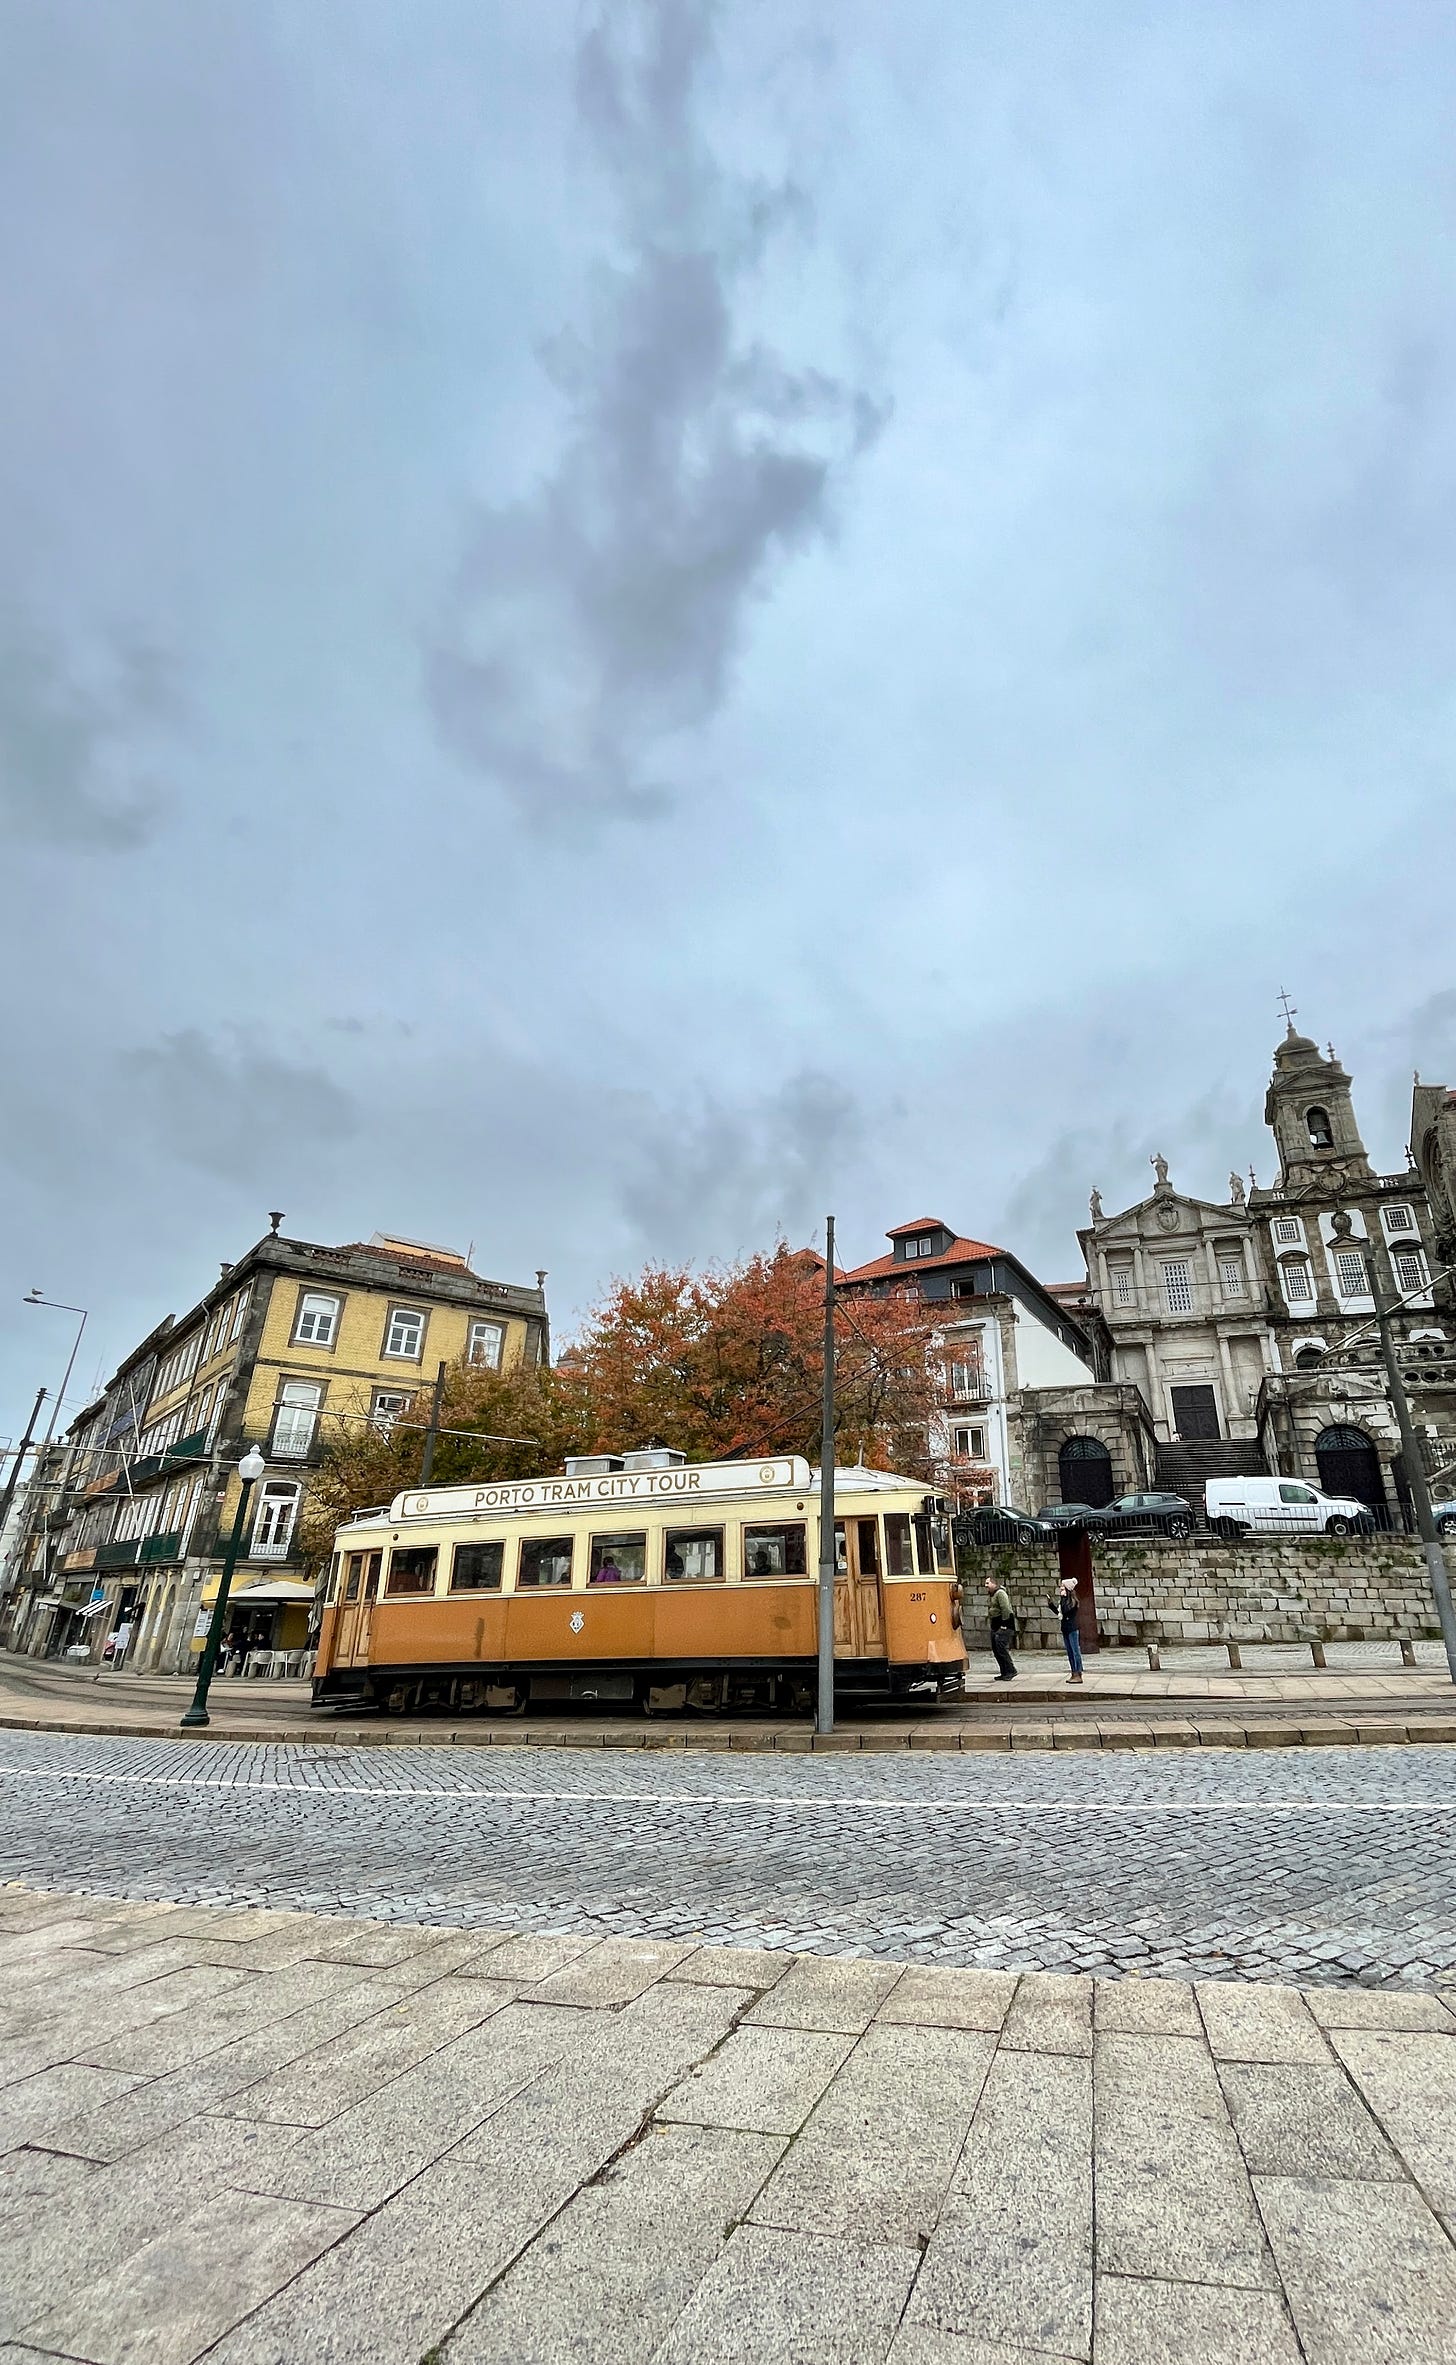 image: a photo of a cheery yellow Porto tram flank by autumn trees, a muted yellow coloured building on the left and the St Francis church on the right.